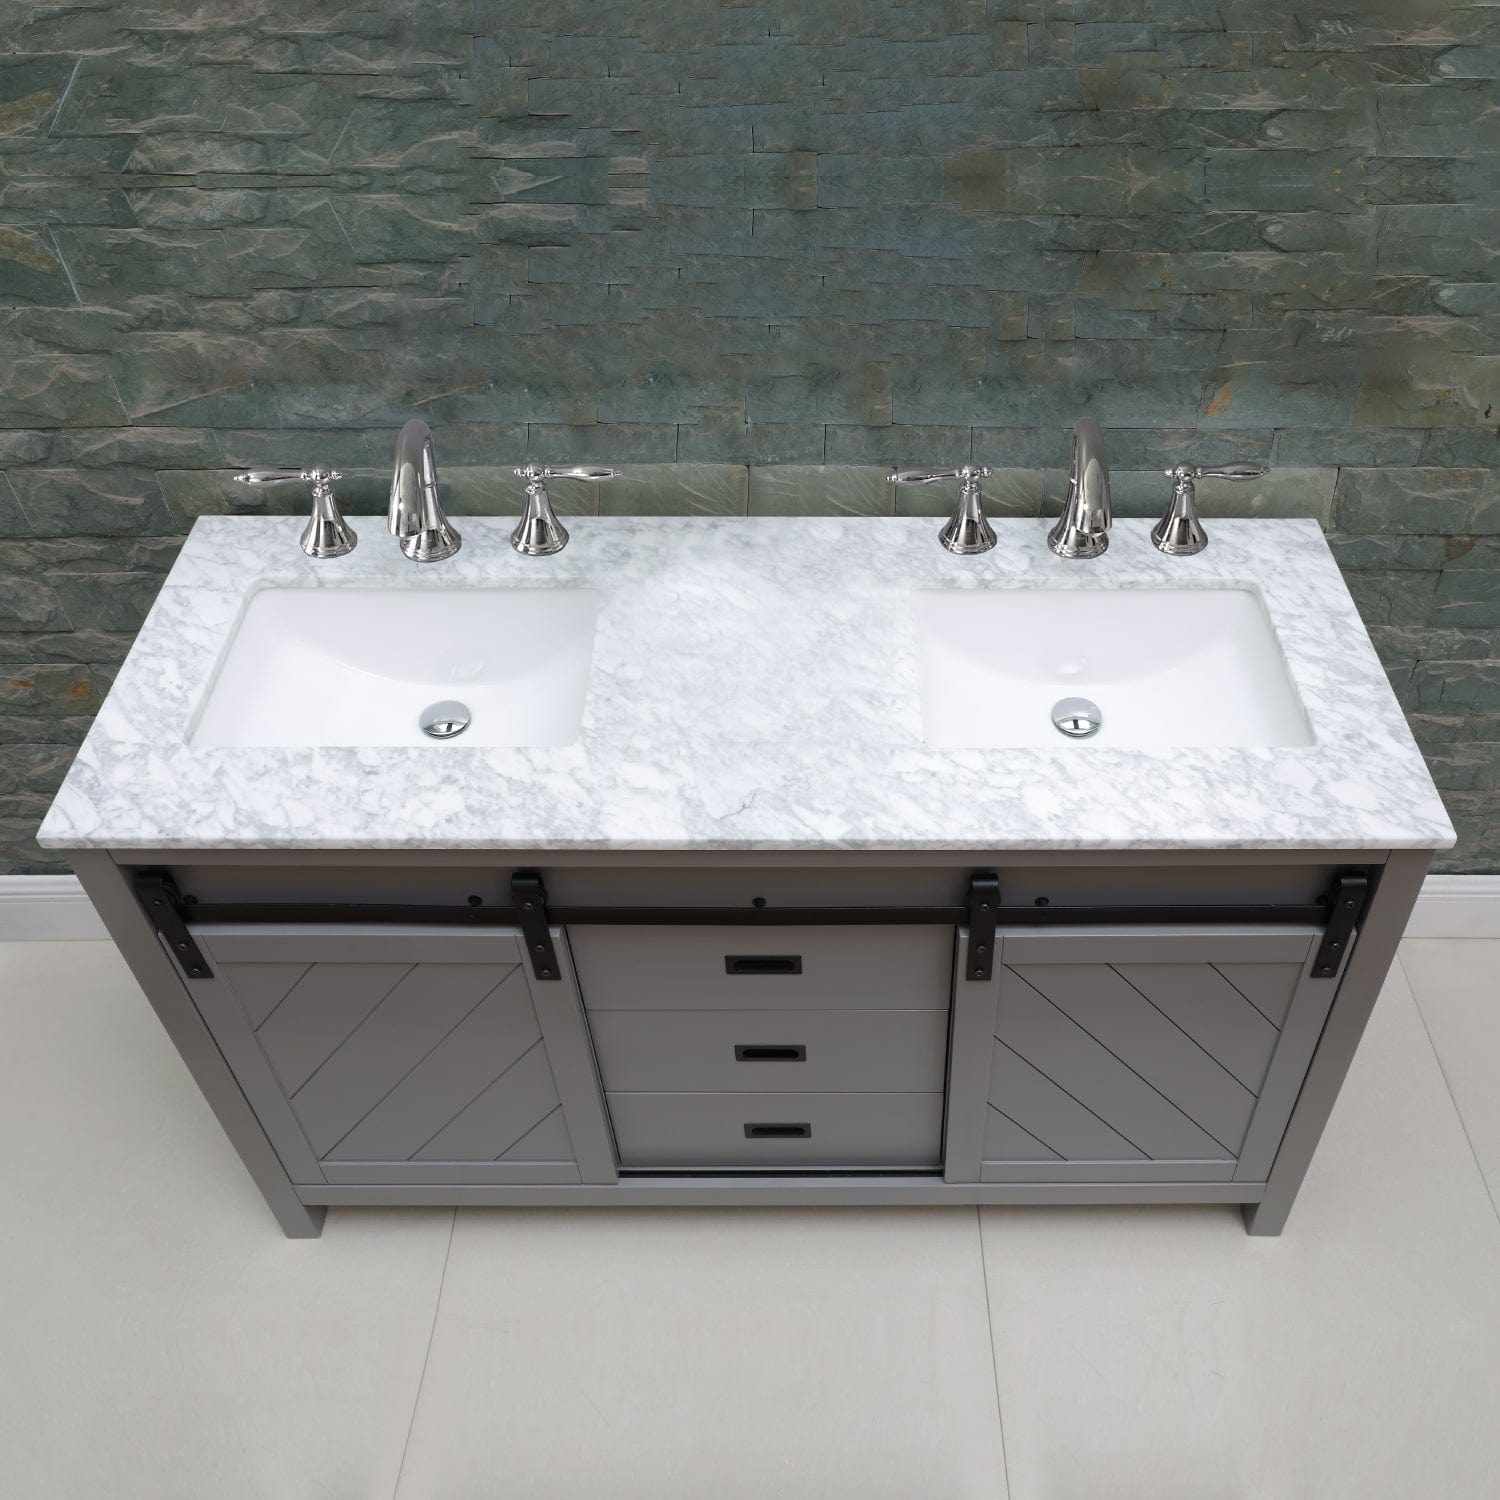 Altair Kinsley 60" Double Bathroom Vanity Set in Gray and Carrara White Marble Countertop without Mirror 536060-GR-CA-NM - Molaix631112970525Vanity536060-GR-CA-NM